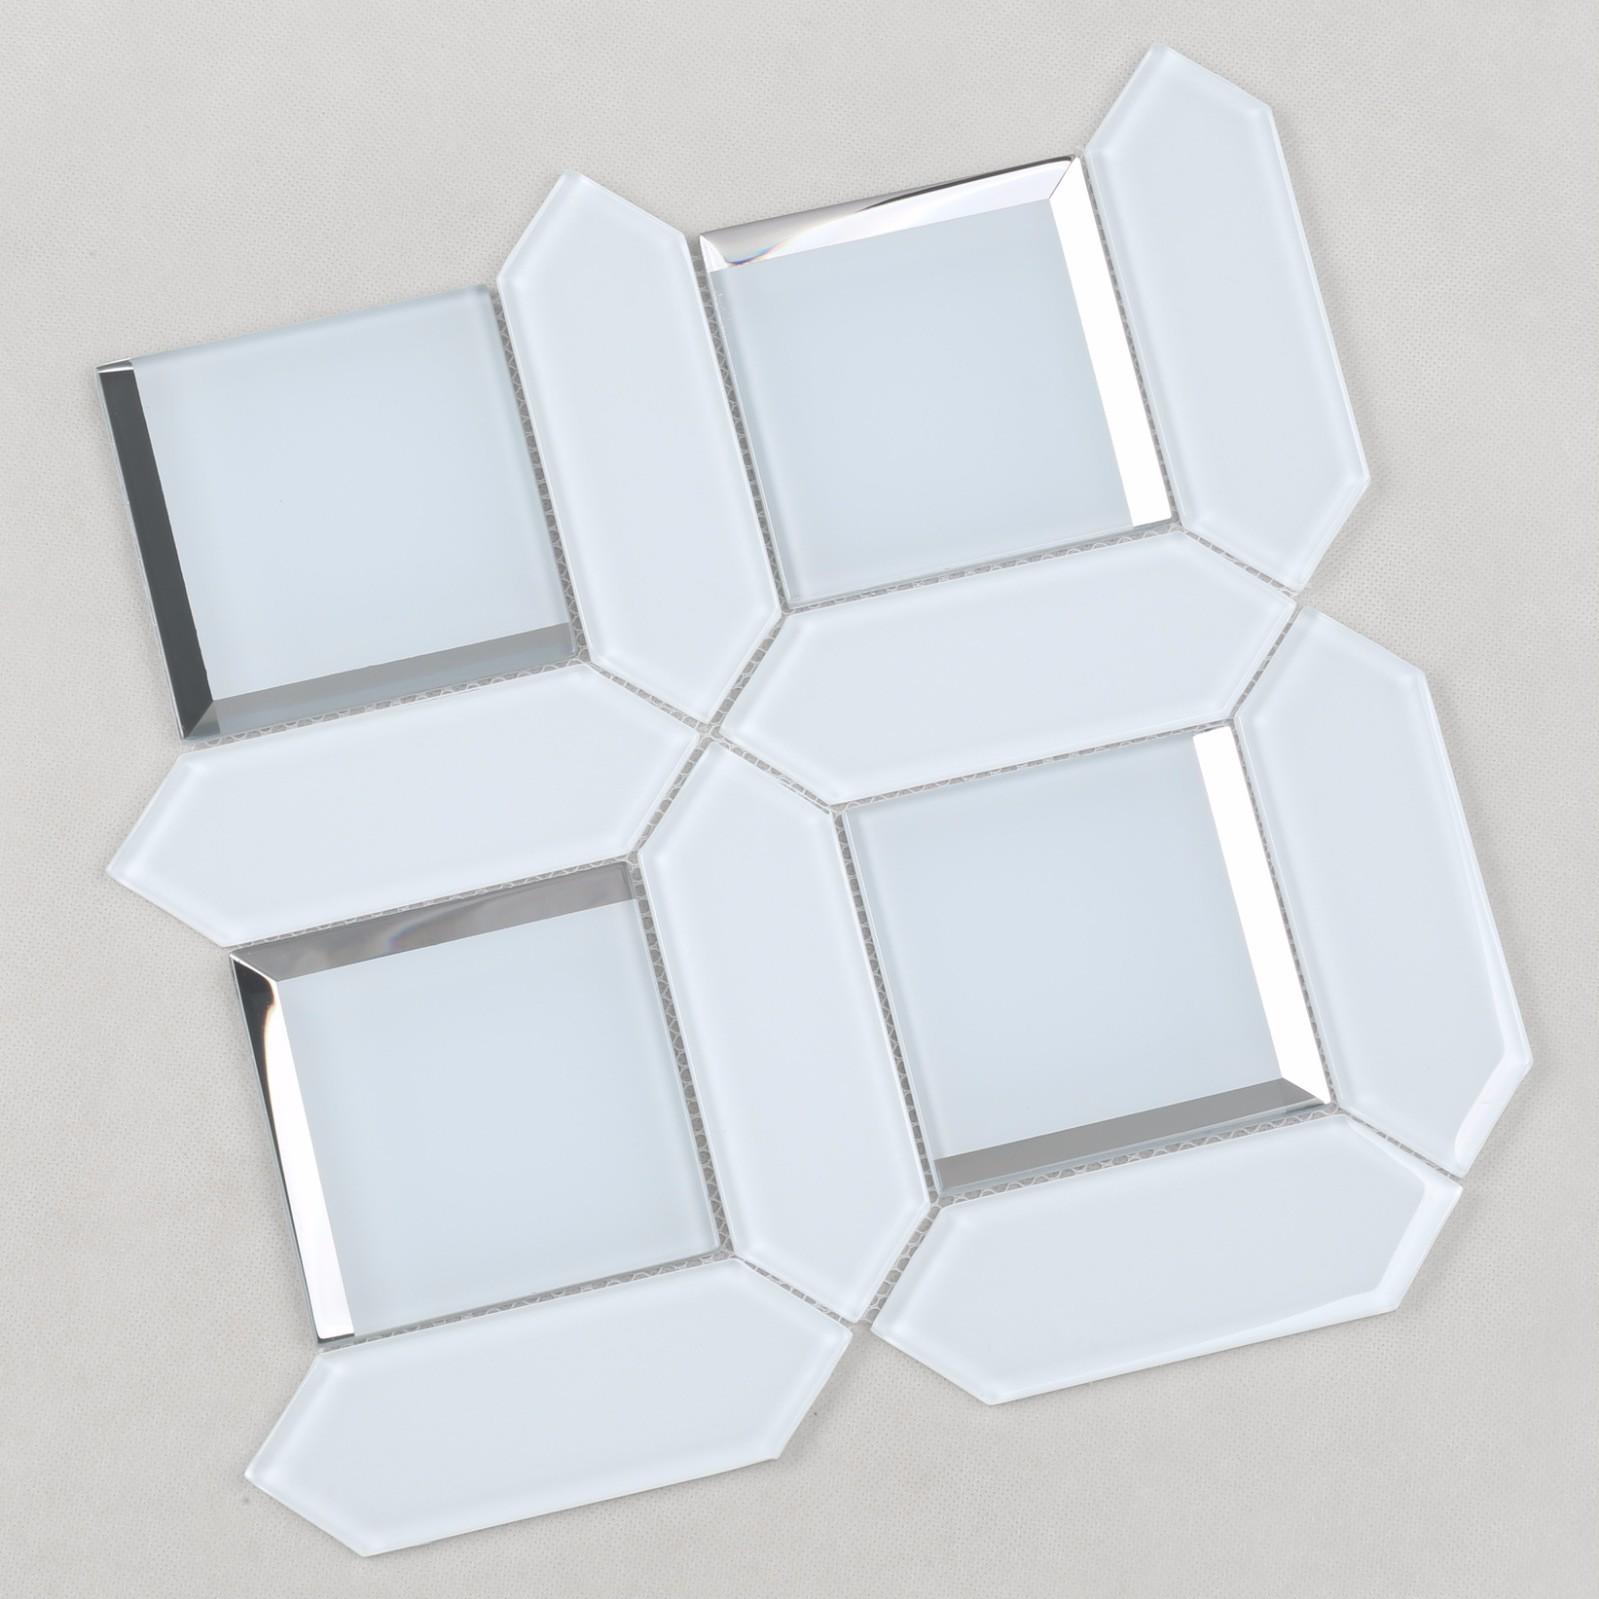 Heng Xing Top oblong hexagon tile Suppliers for kitchen-2